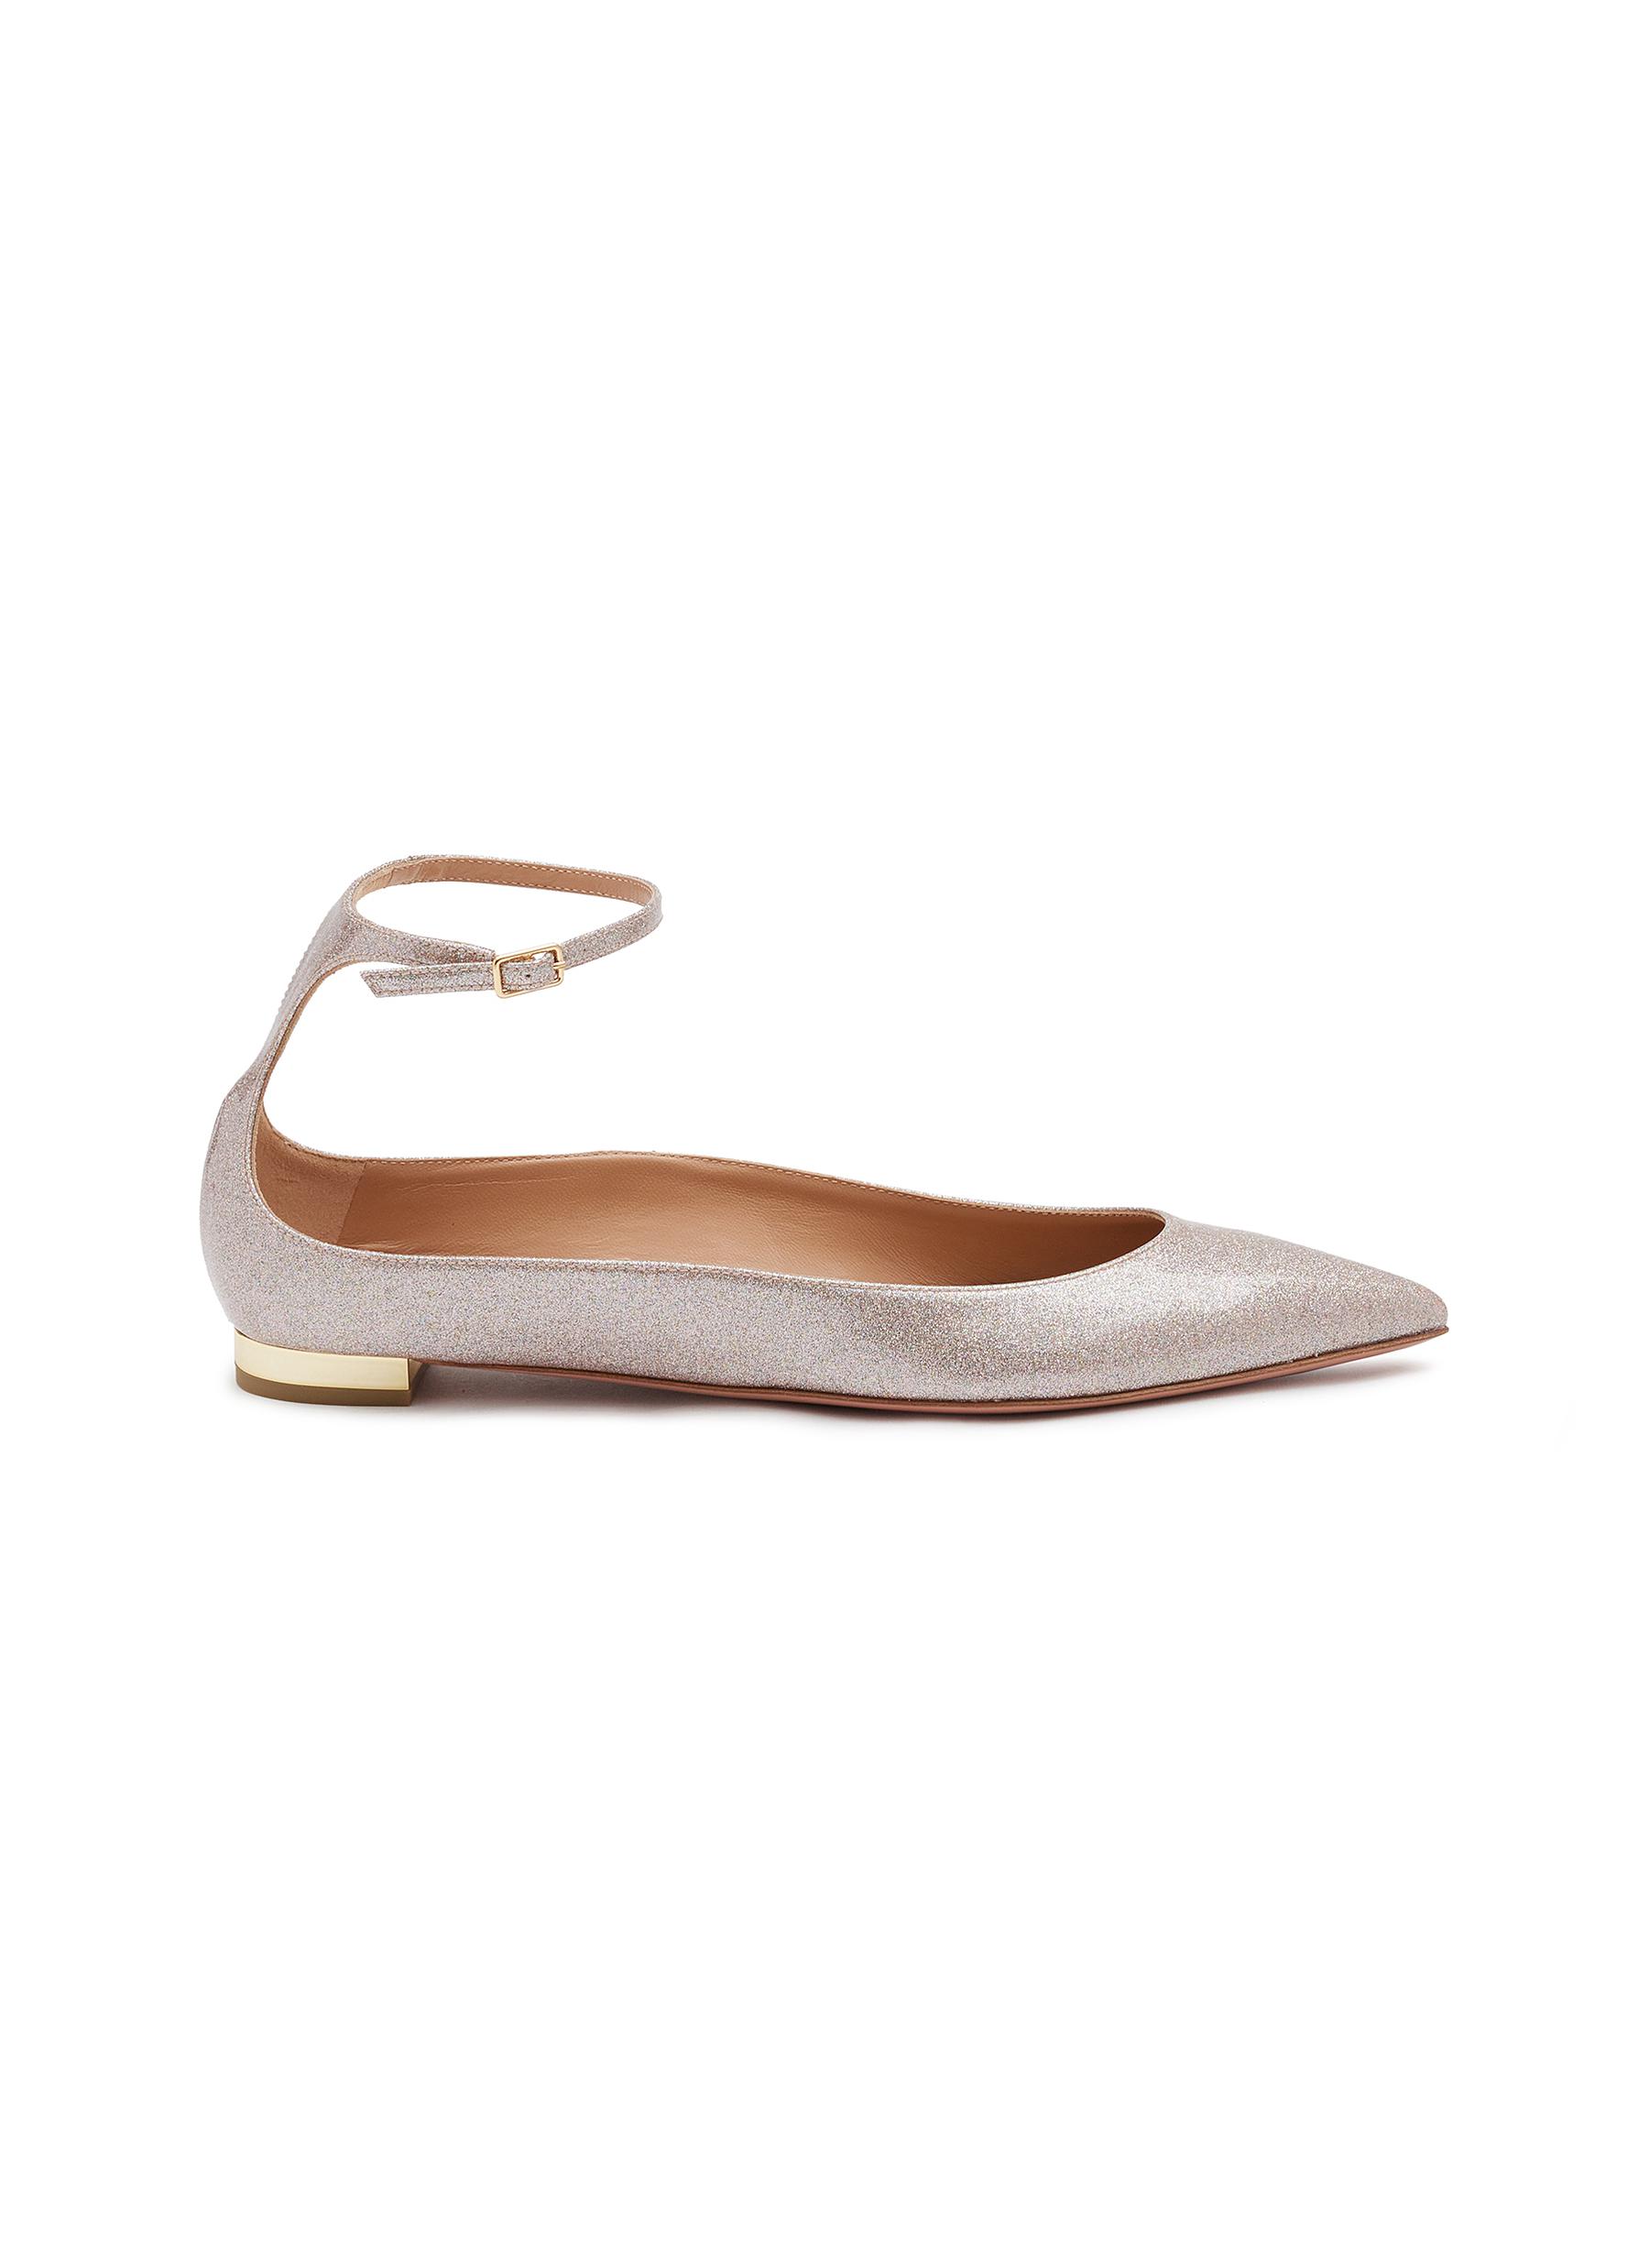 Love Affair Skimmer Patent Leather Flats